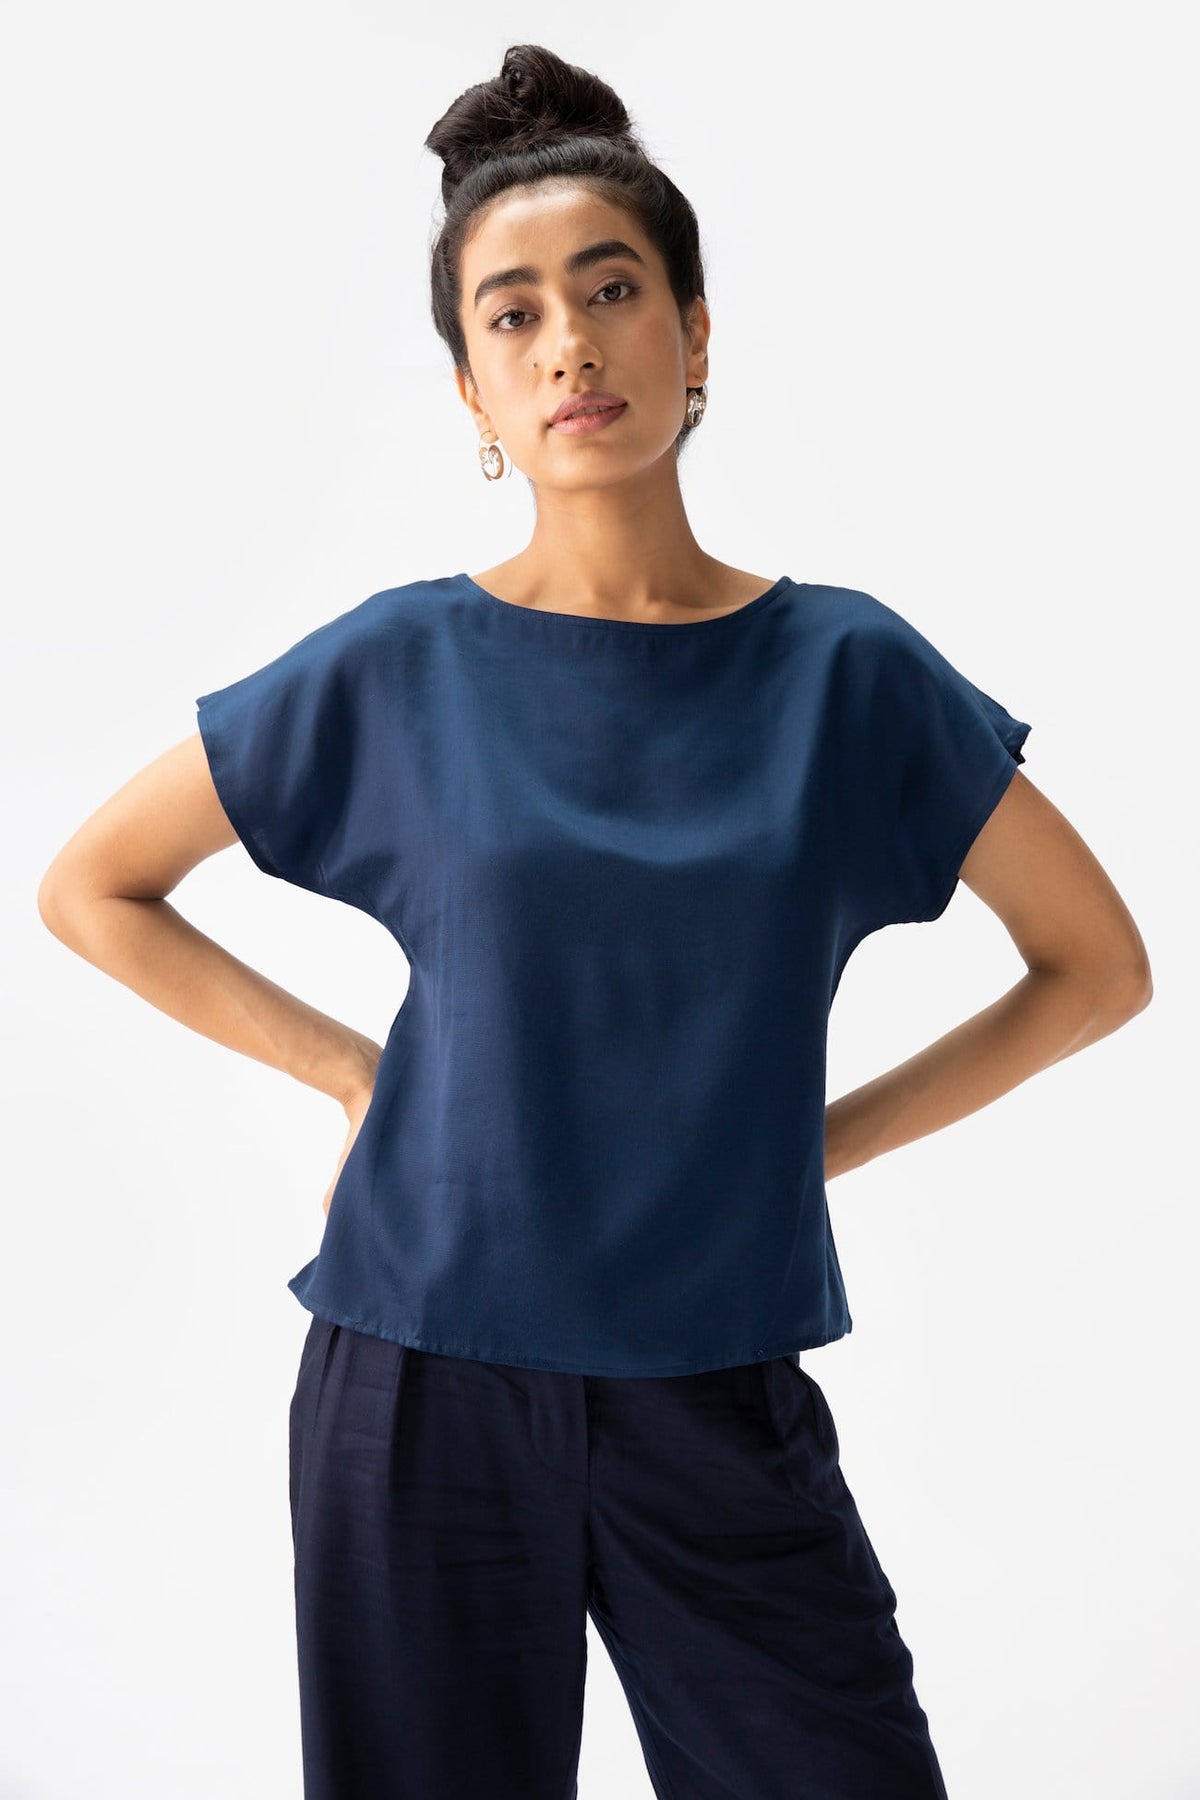 Saltpetre womens formal work t-shirts for under blazers in organic cotton with rounded necks - navy blue